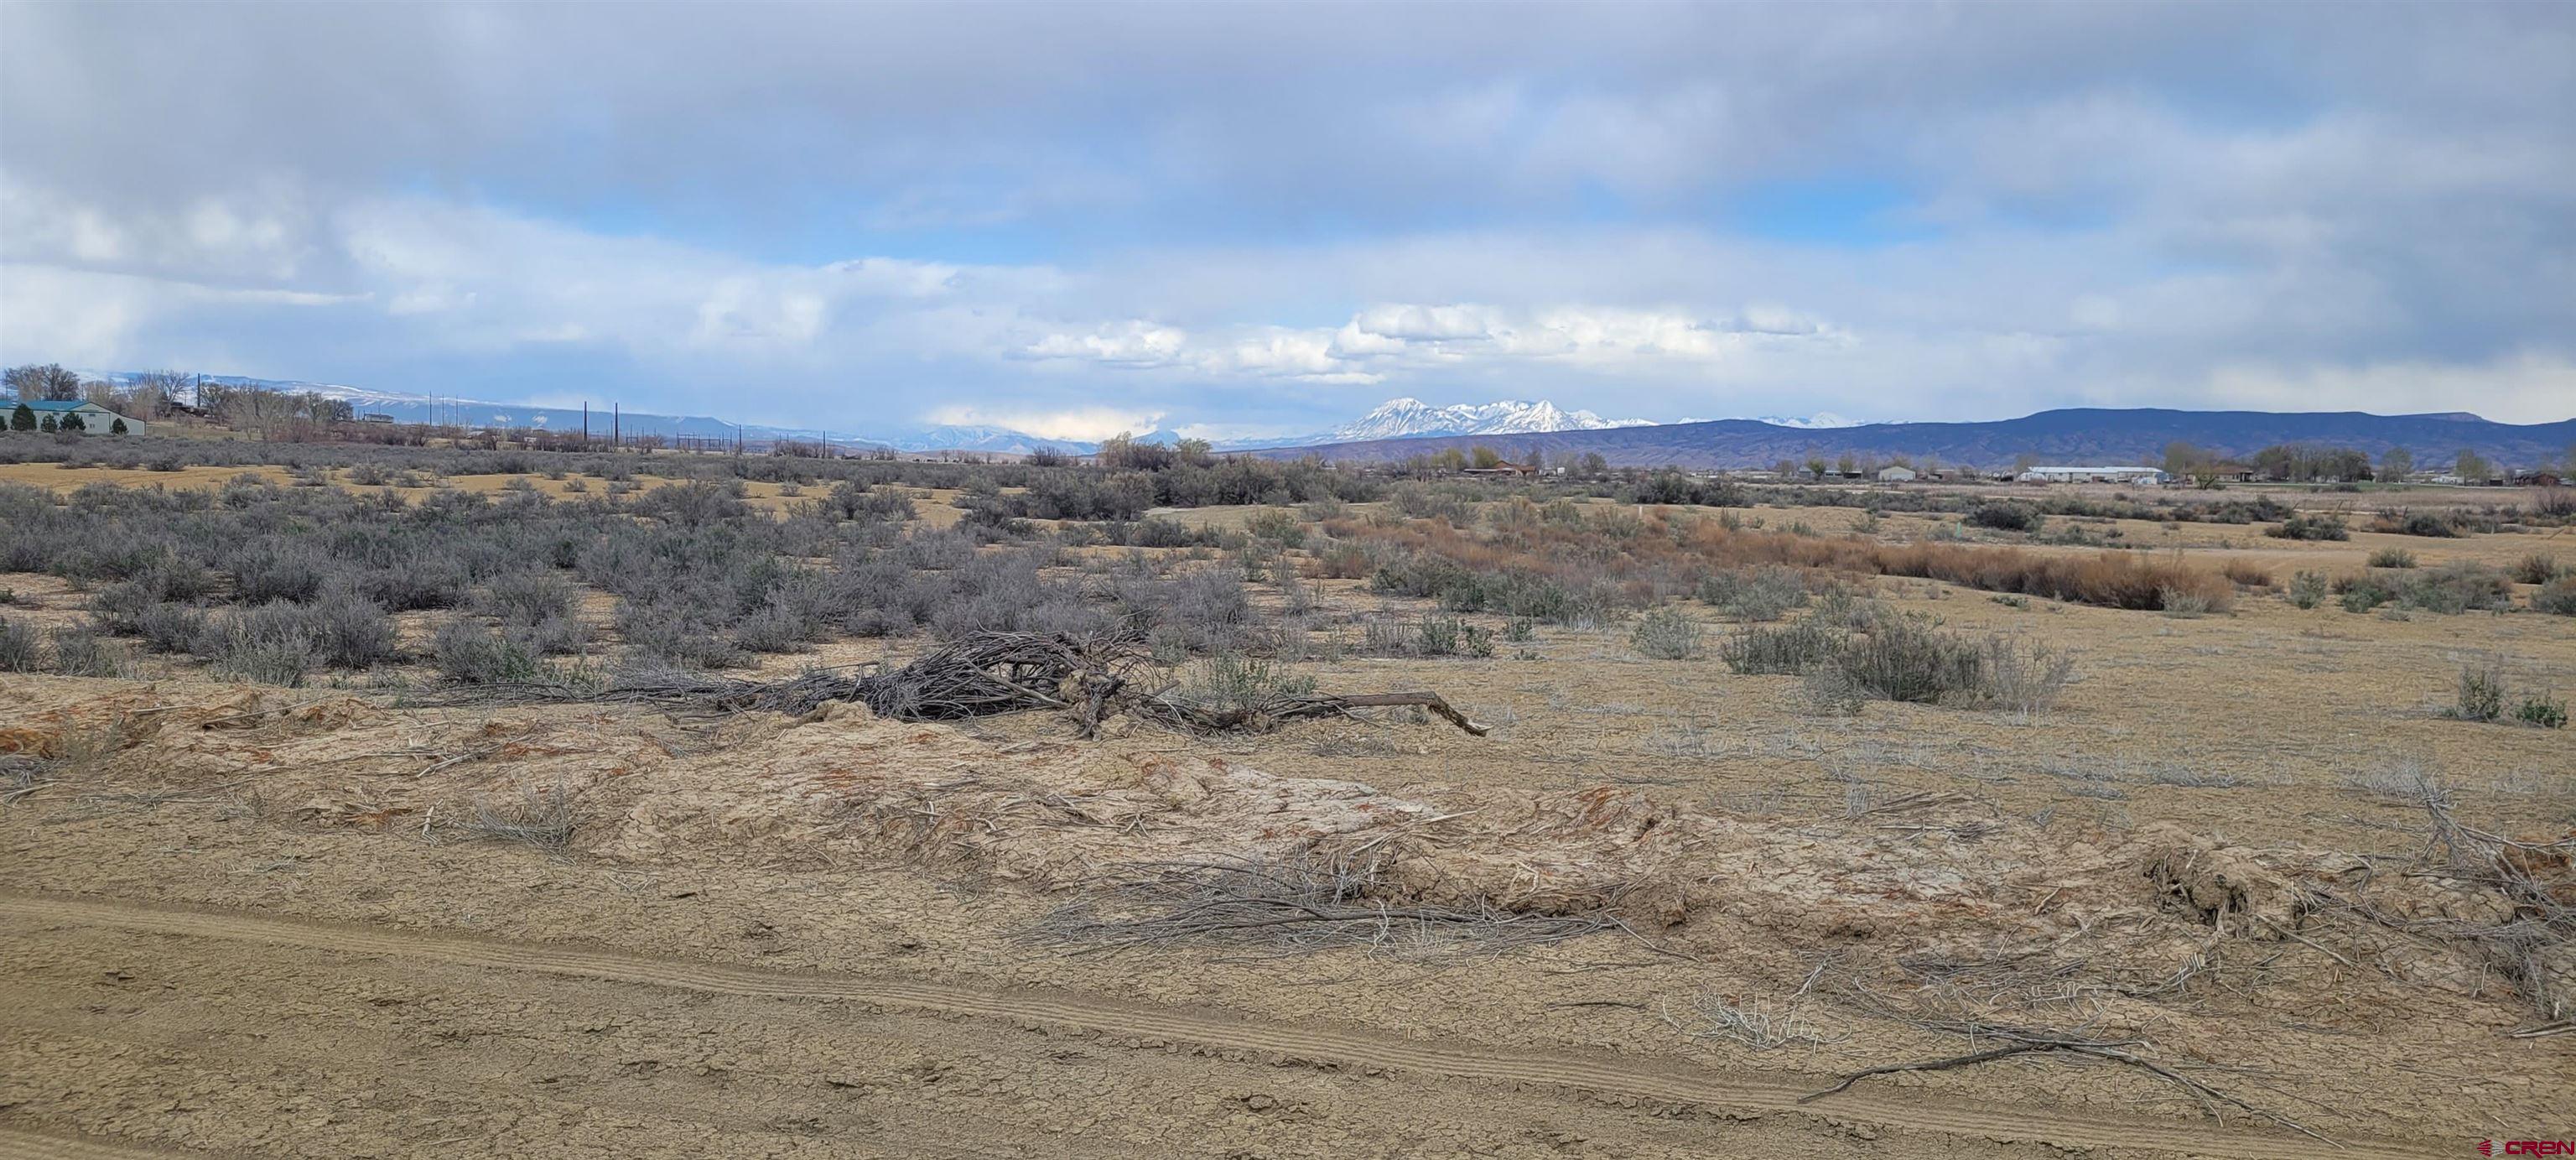 Attention Developers!!! Sellers motivated! This great piece of land could possibly be subdivided into more lots with County approval. Deeded easement to F Road. Great solar potential, no obstructions. Mountain views of the West Elk Mountains. Close to Delta High School, great location! Owner financing an option call for more details.